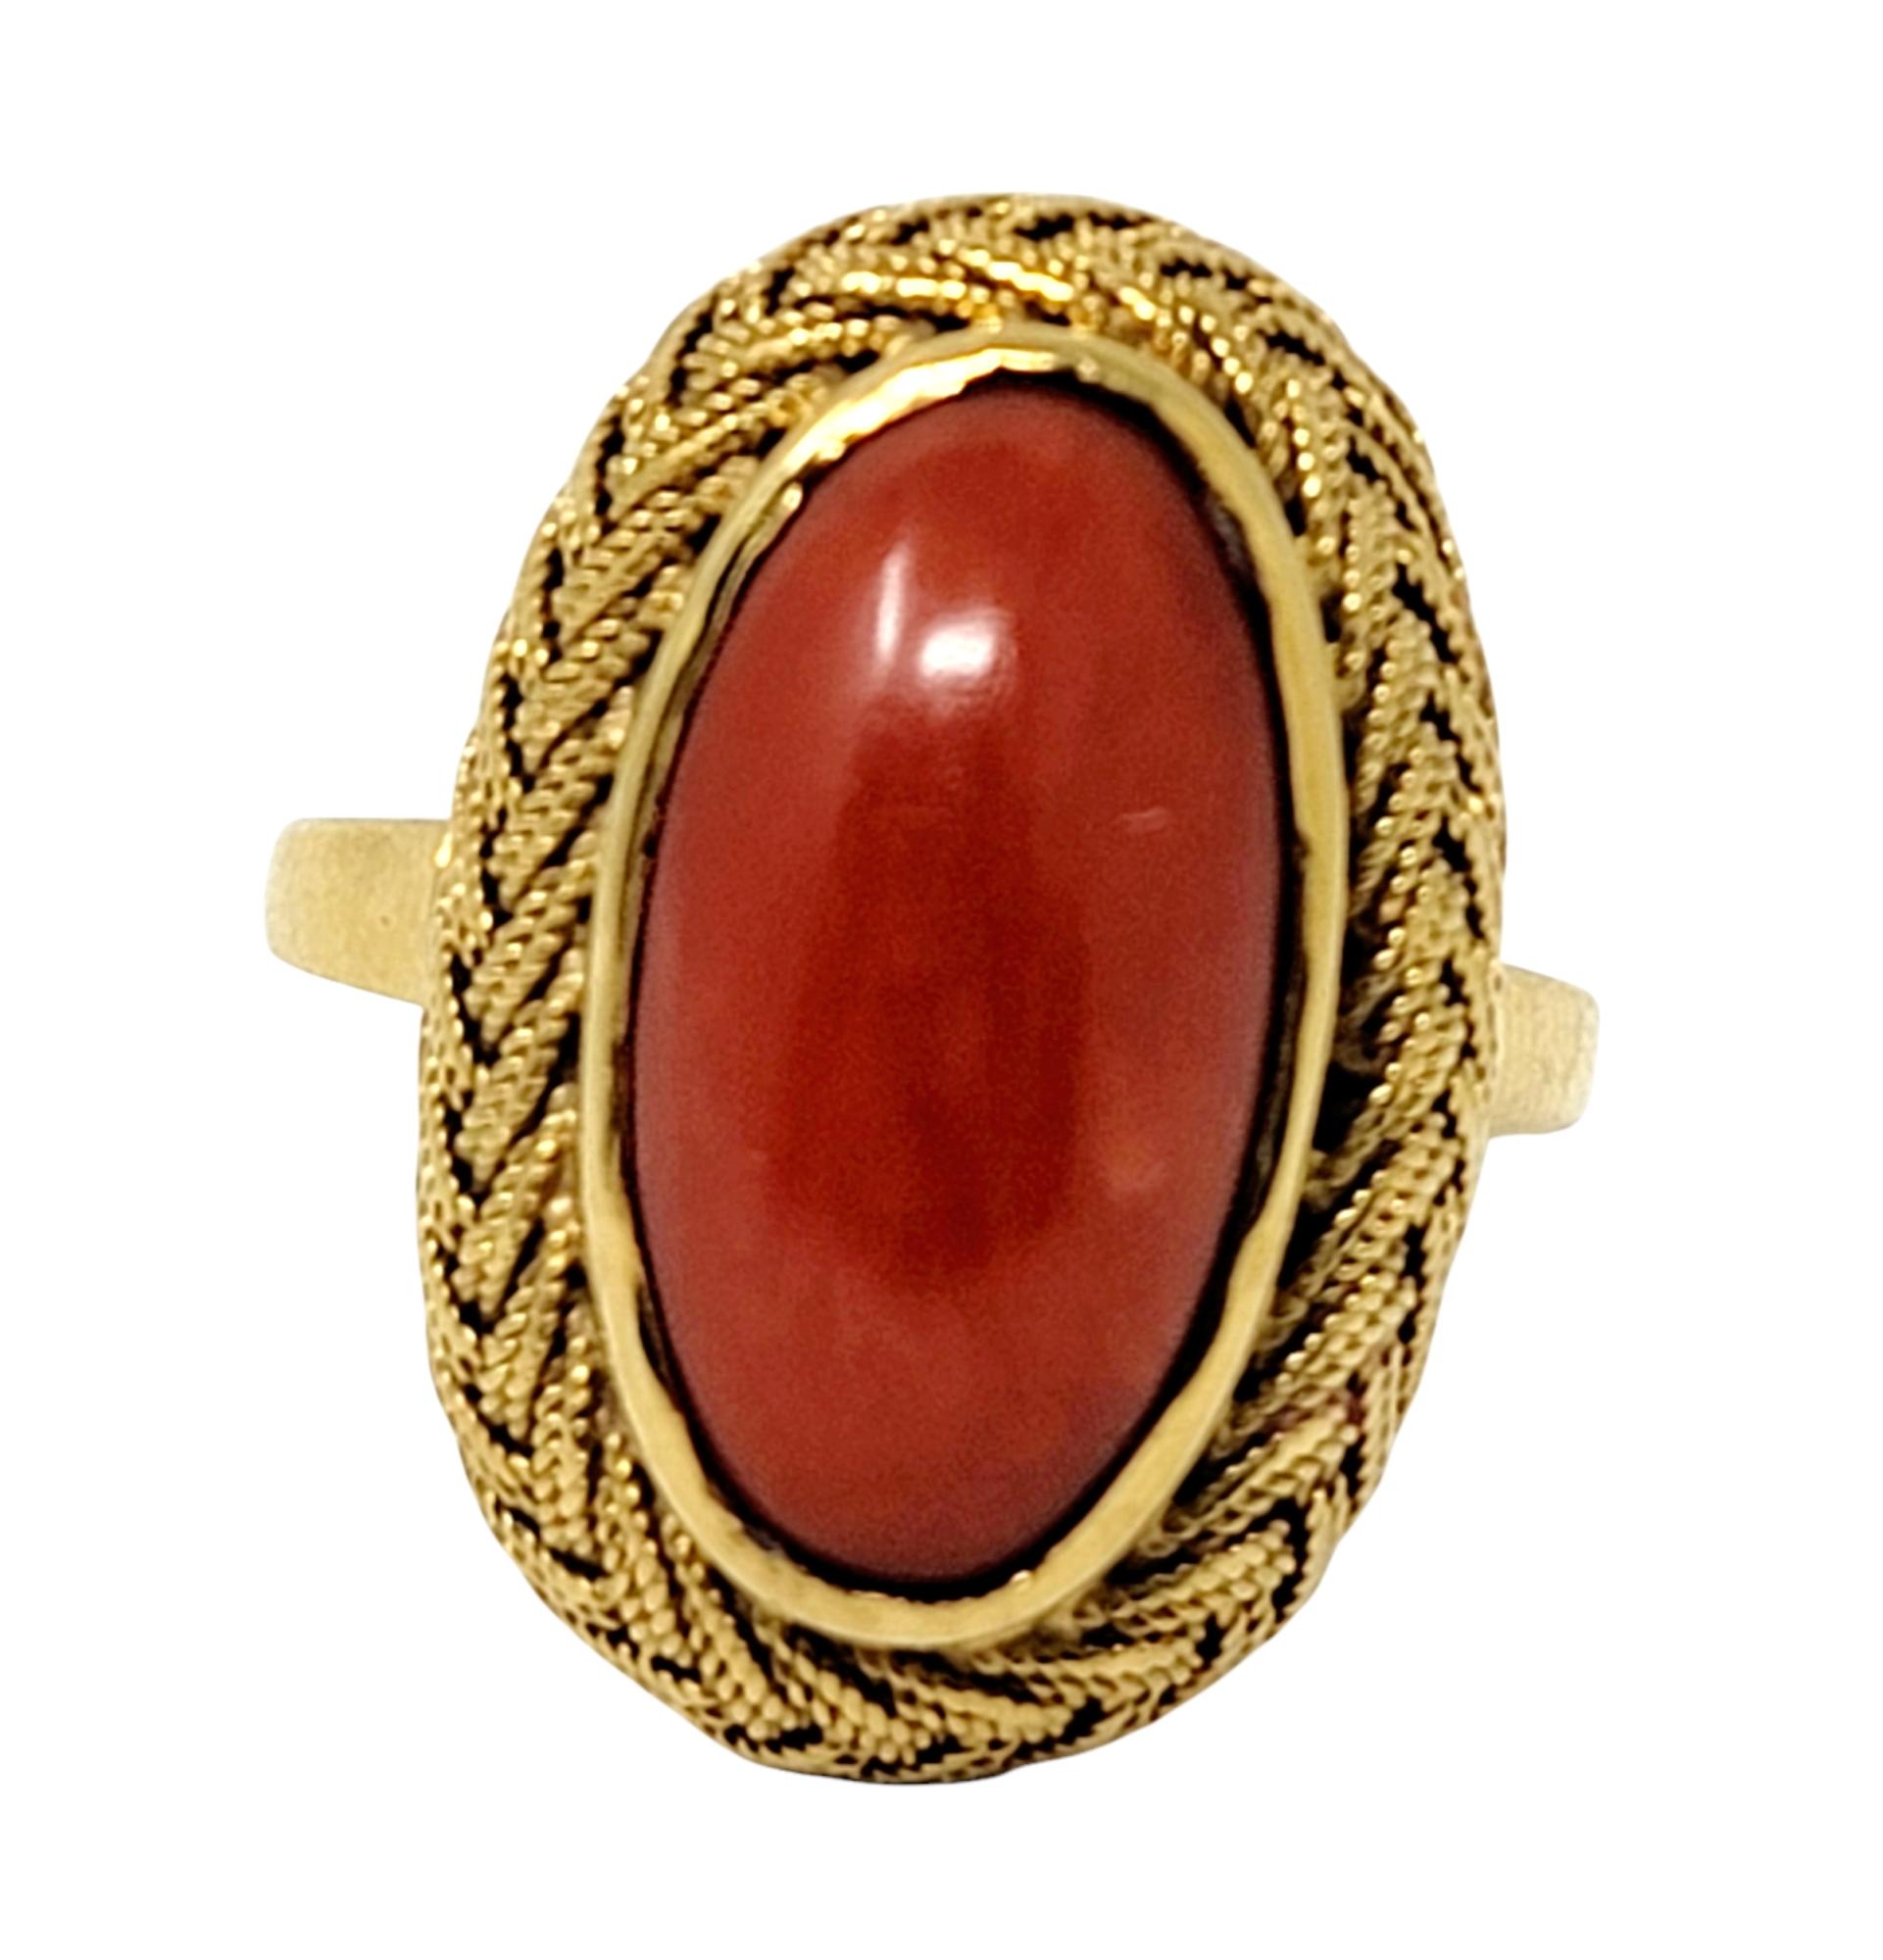 Ring size: 9.75

Elegant vintage cabochon coral ring with an ornate braided 18 karat yellow gold halo. Set in a vertical layout, this beautiful elongated ring flatters and fills the finger. 

Ring size: 9.75
Metal: 18K Yellow Gold 
Weight: 7.13